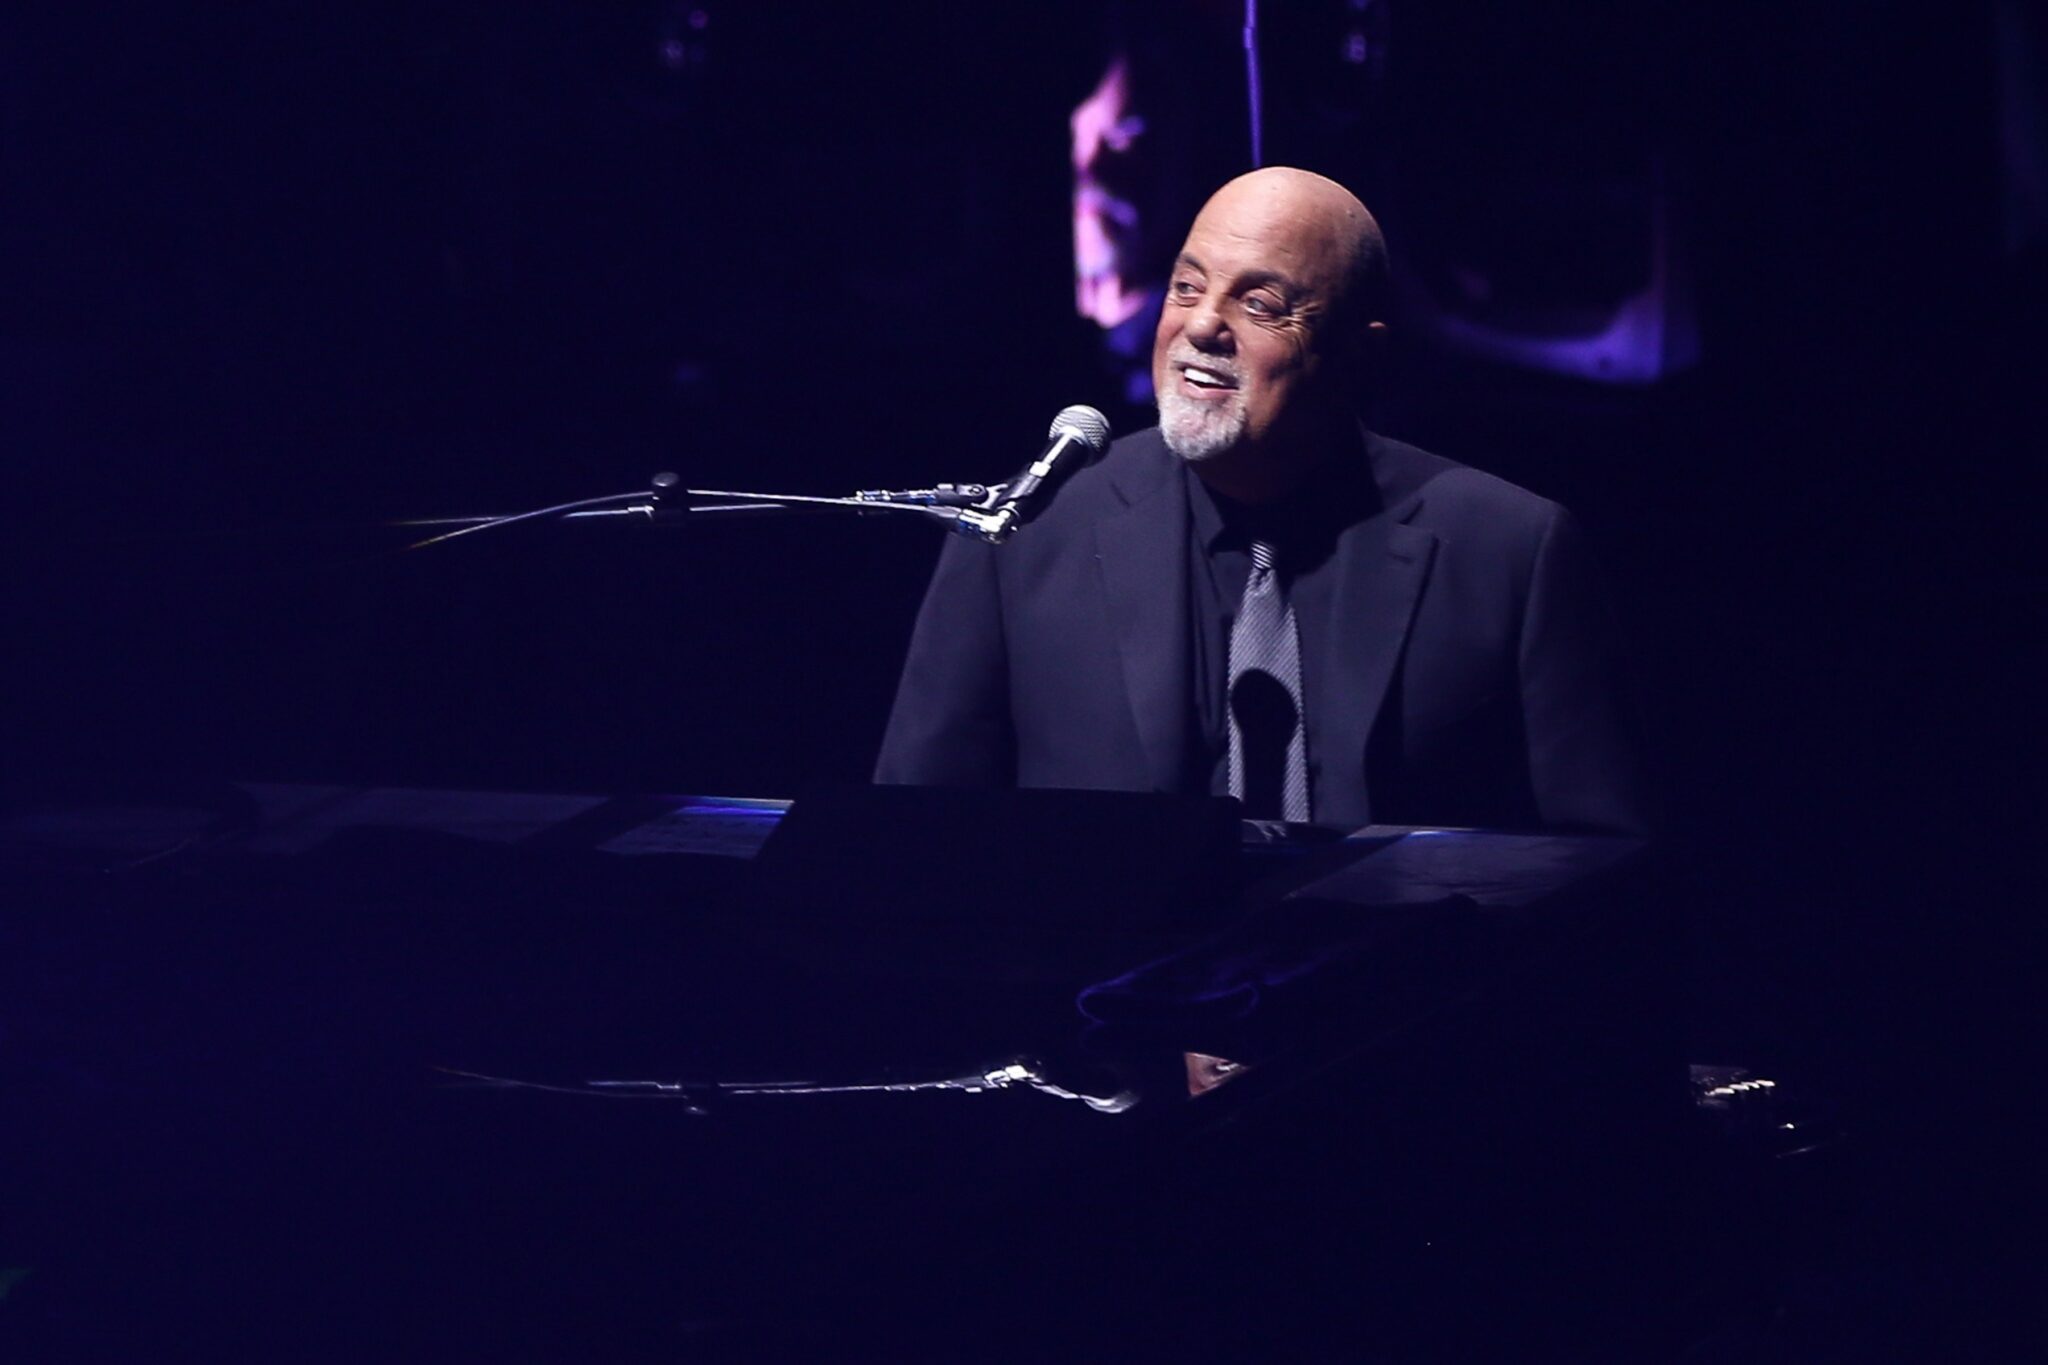 Billy Joel playing in concert